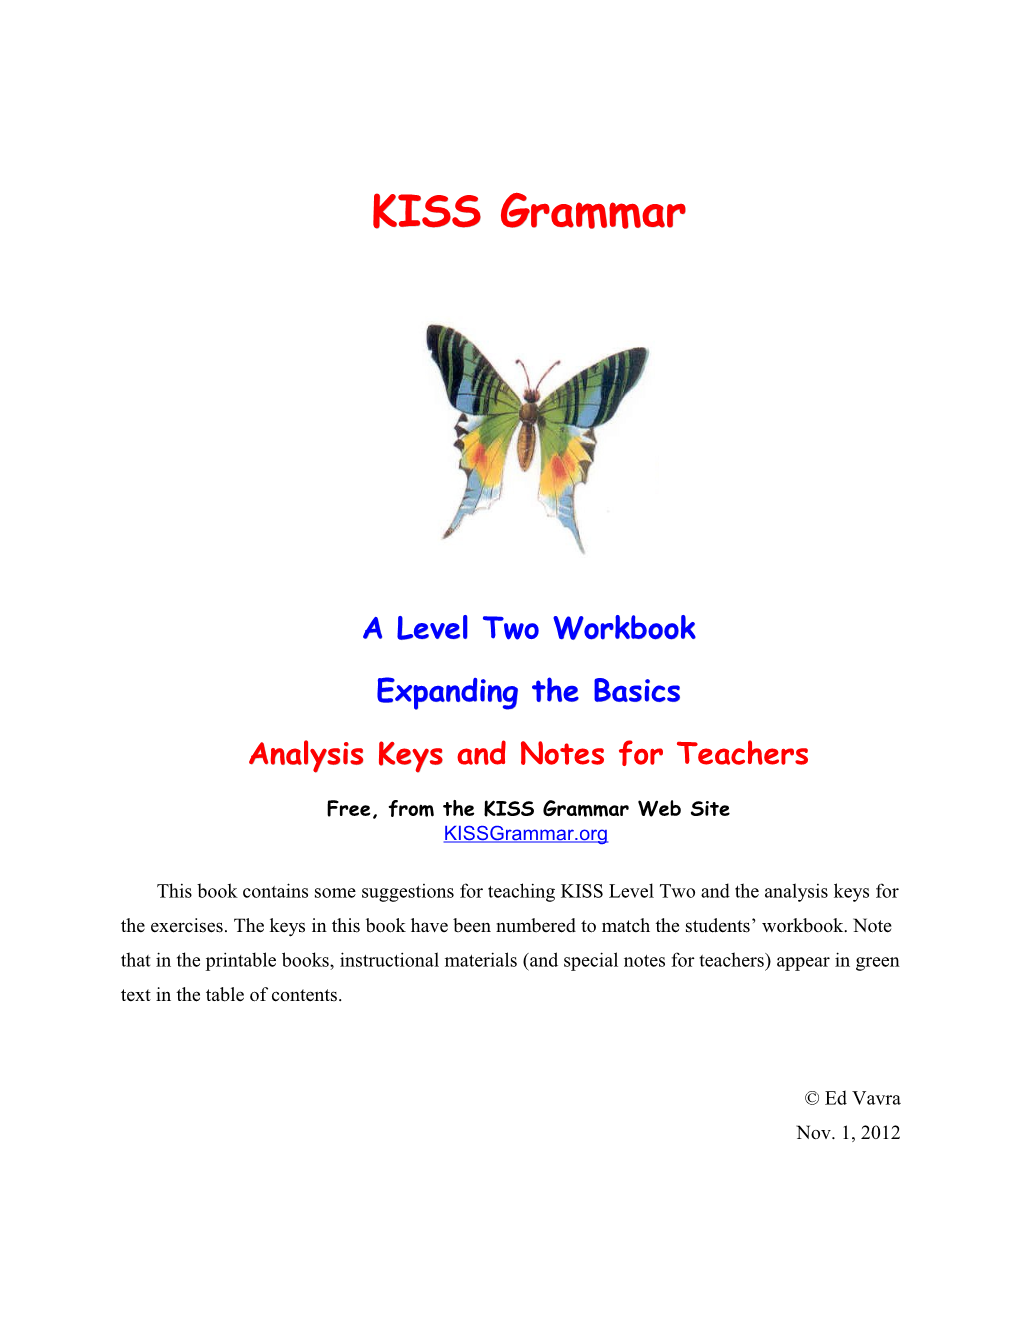 A Level Two Workbook